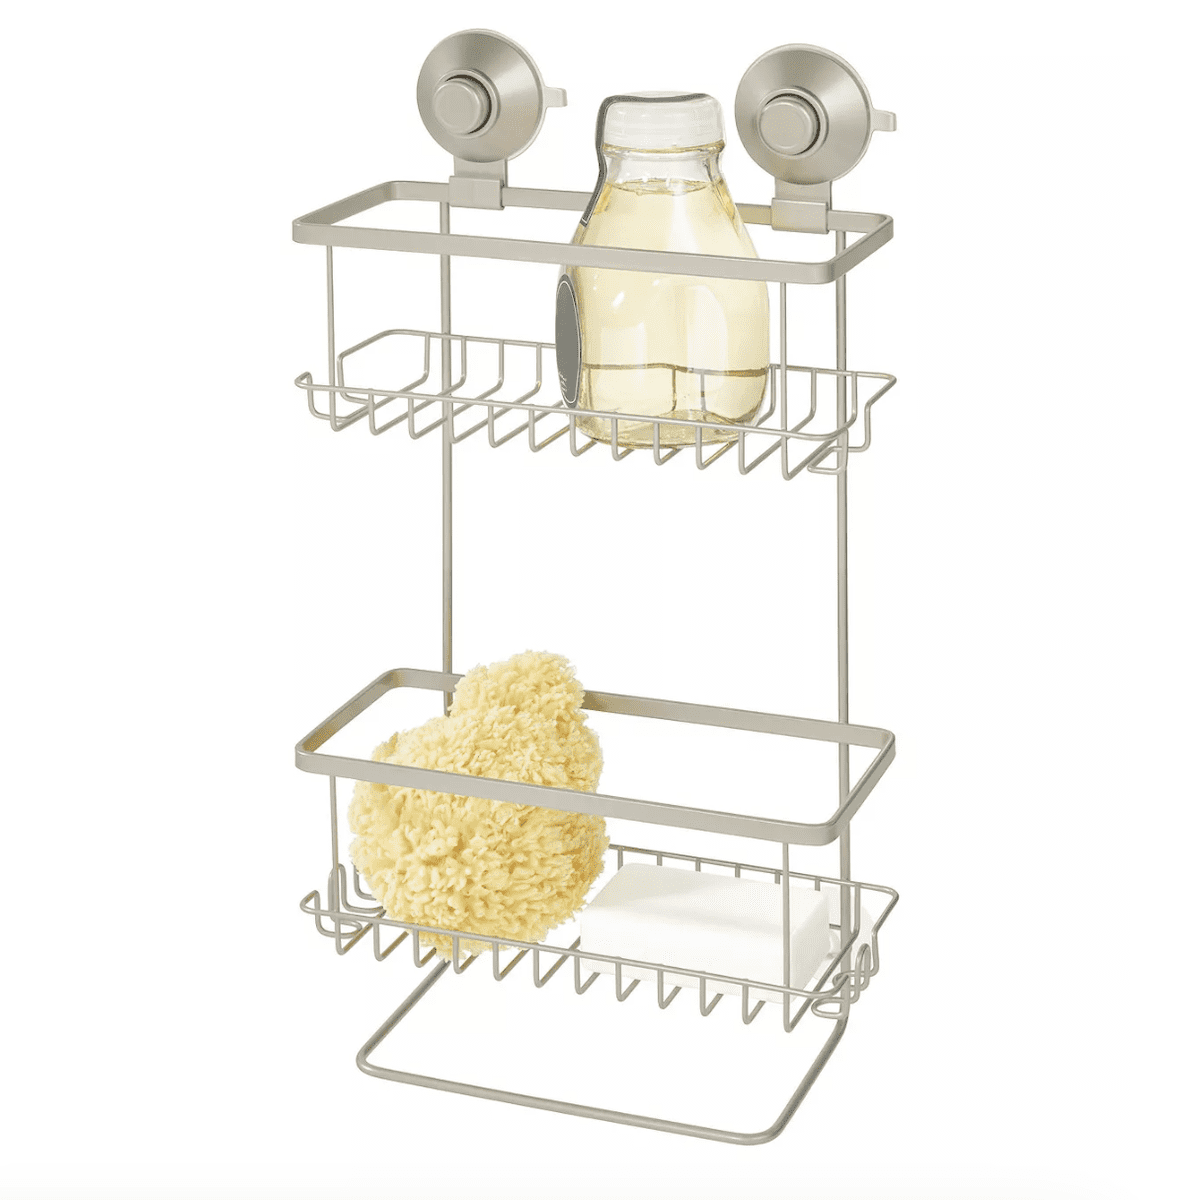 https://cdn.apartmenttherapy.info/image/upload/v1680187661/gen-workflow/product-database/IDESIGN-Everett-Metal-Push-Lock-Suction-Shower-Caddy.png